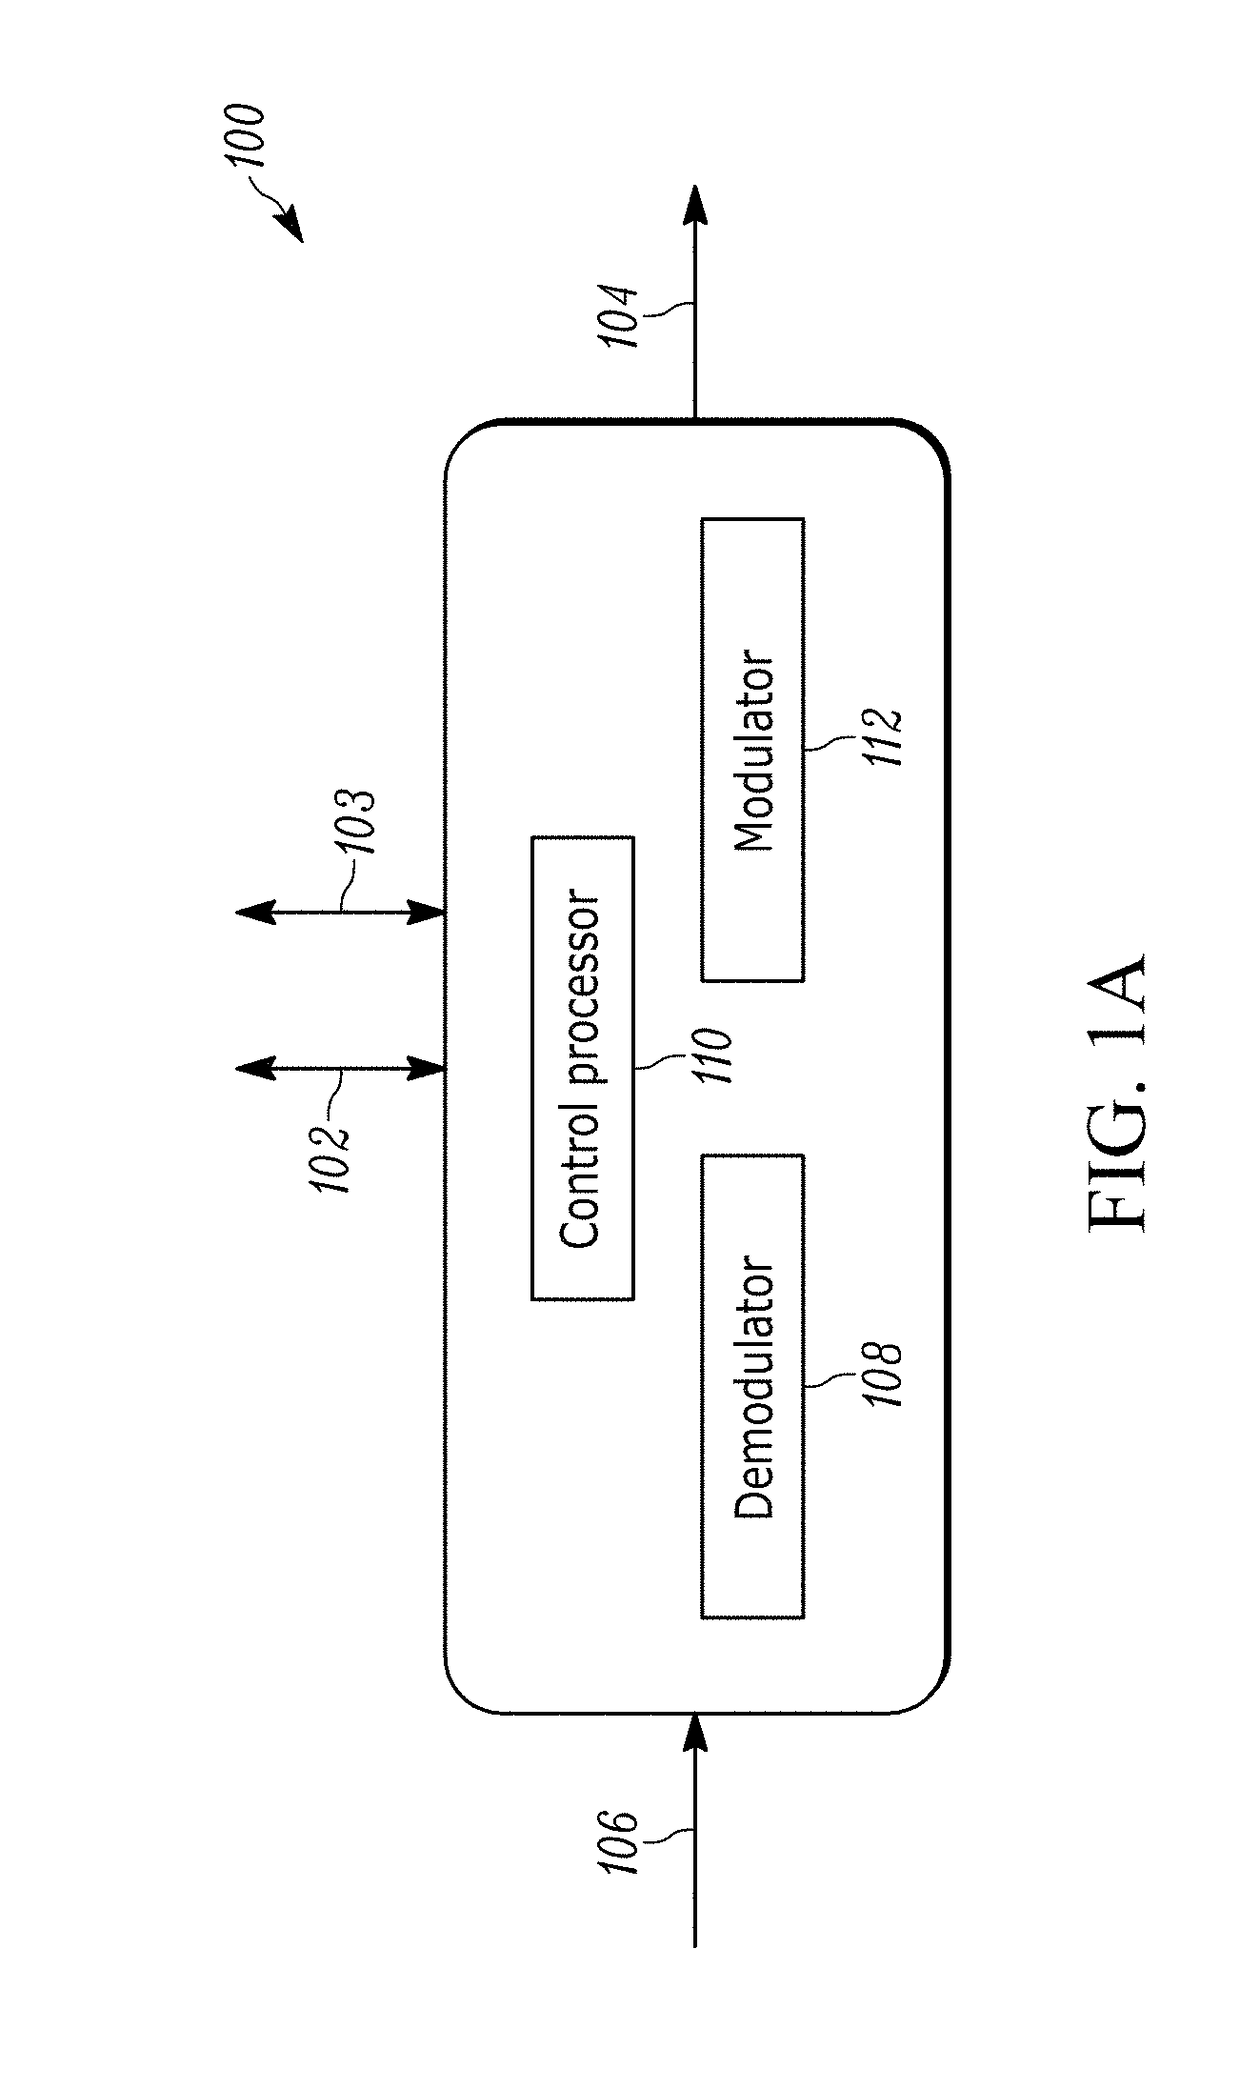 Method and Apparatus for Hardware-Configured Network